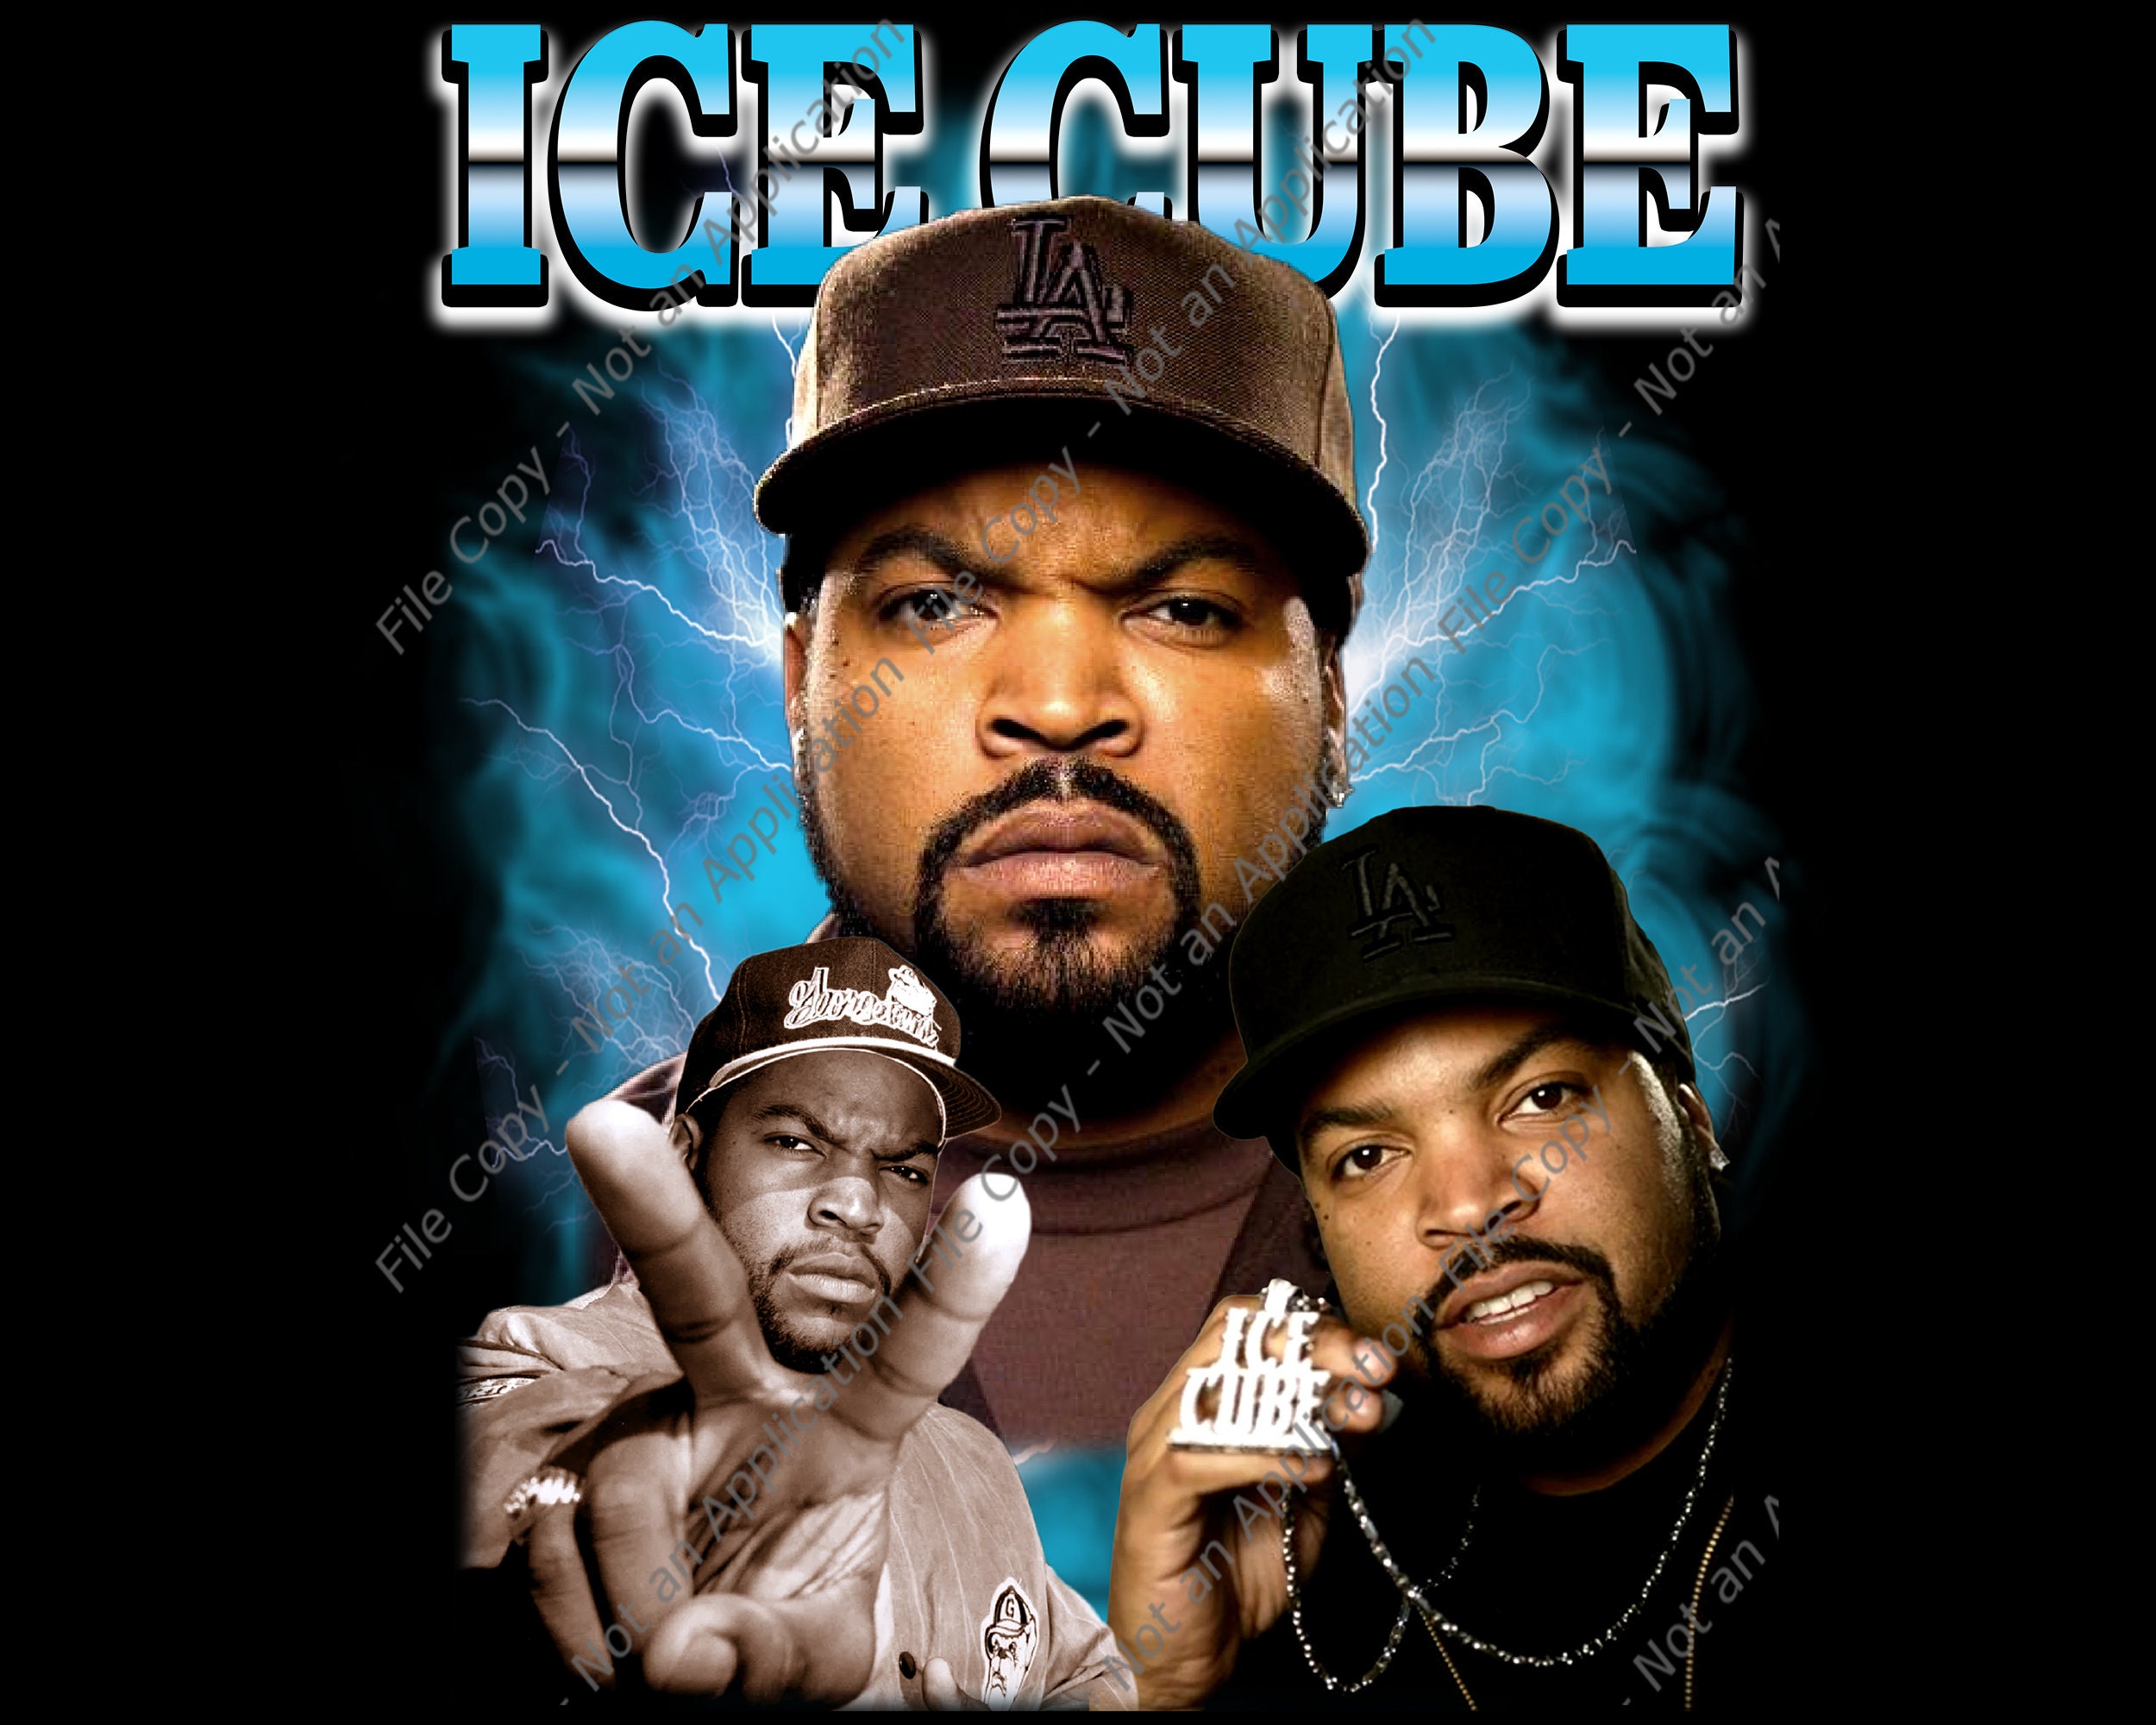  XIaoMa Rapper Ice Cube Poster Album Vintage Cover